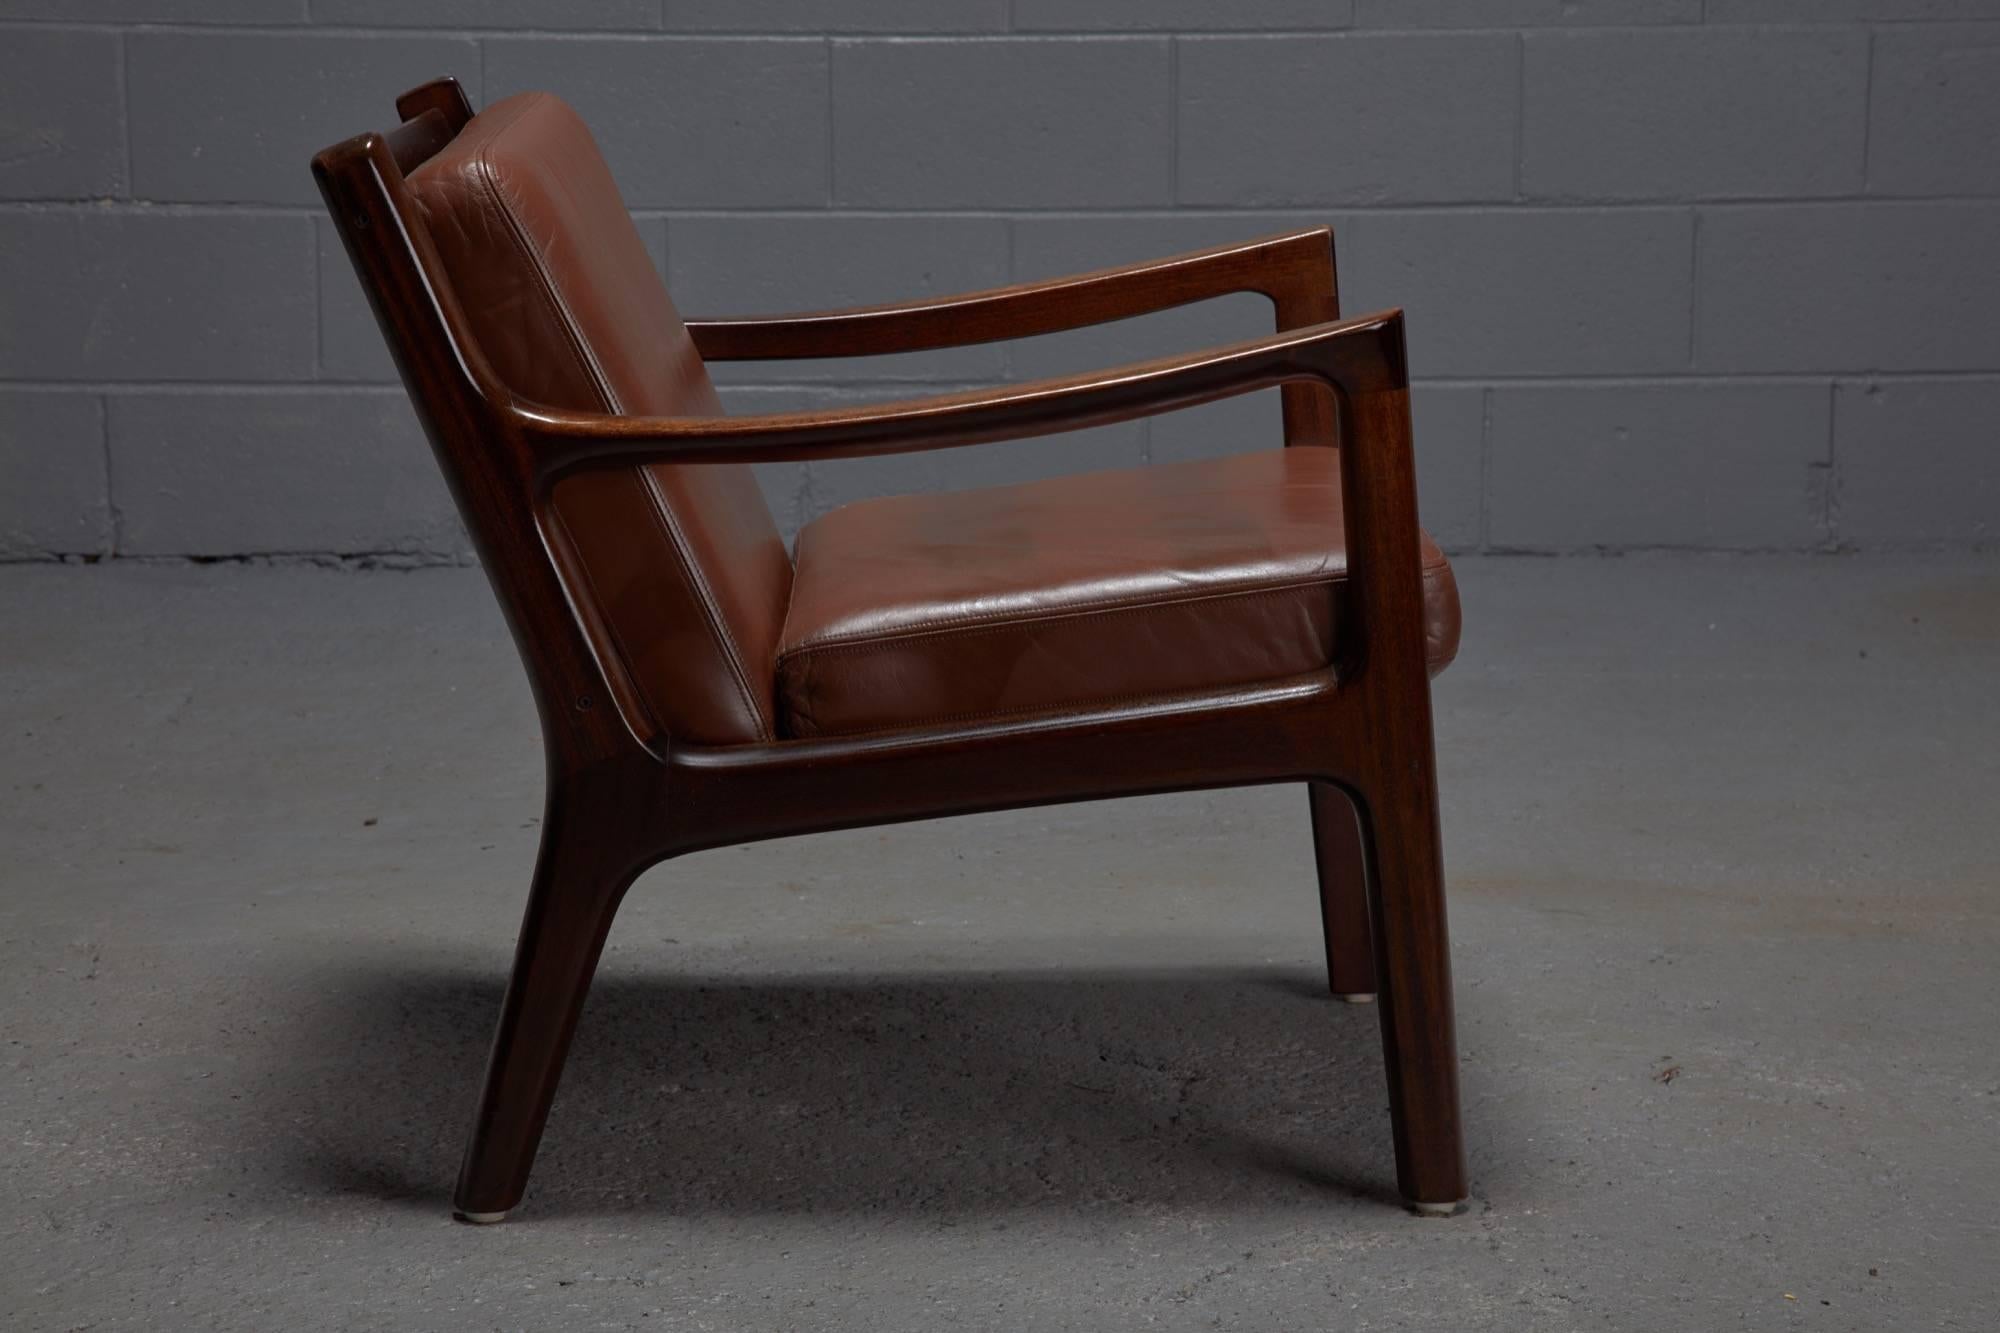 Designed by Ole Wanscher and produced by France & Son in Denmark, these Senator chairs are constructed with teak frames and brown leather seat and back cushions. Chairs sold as a pair.